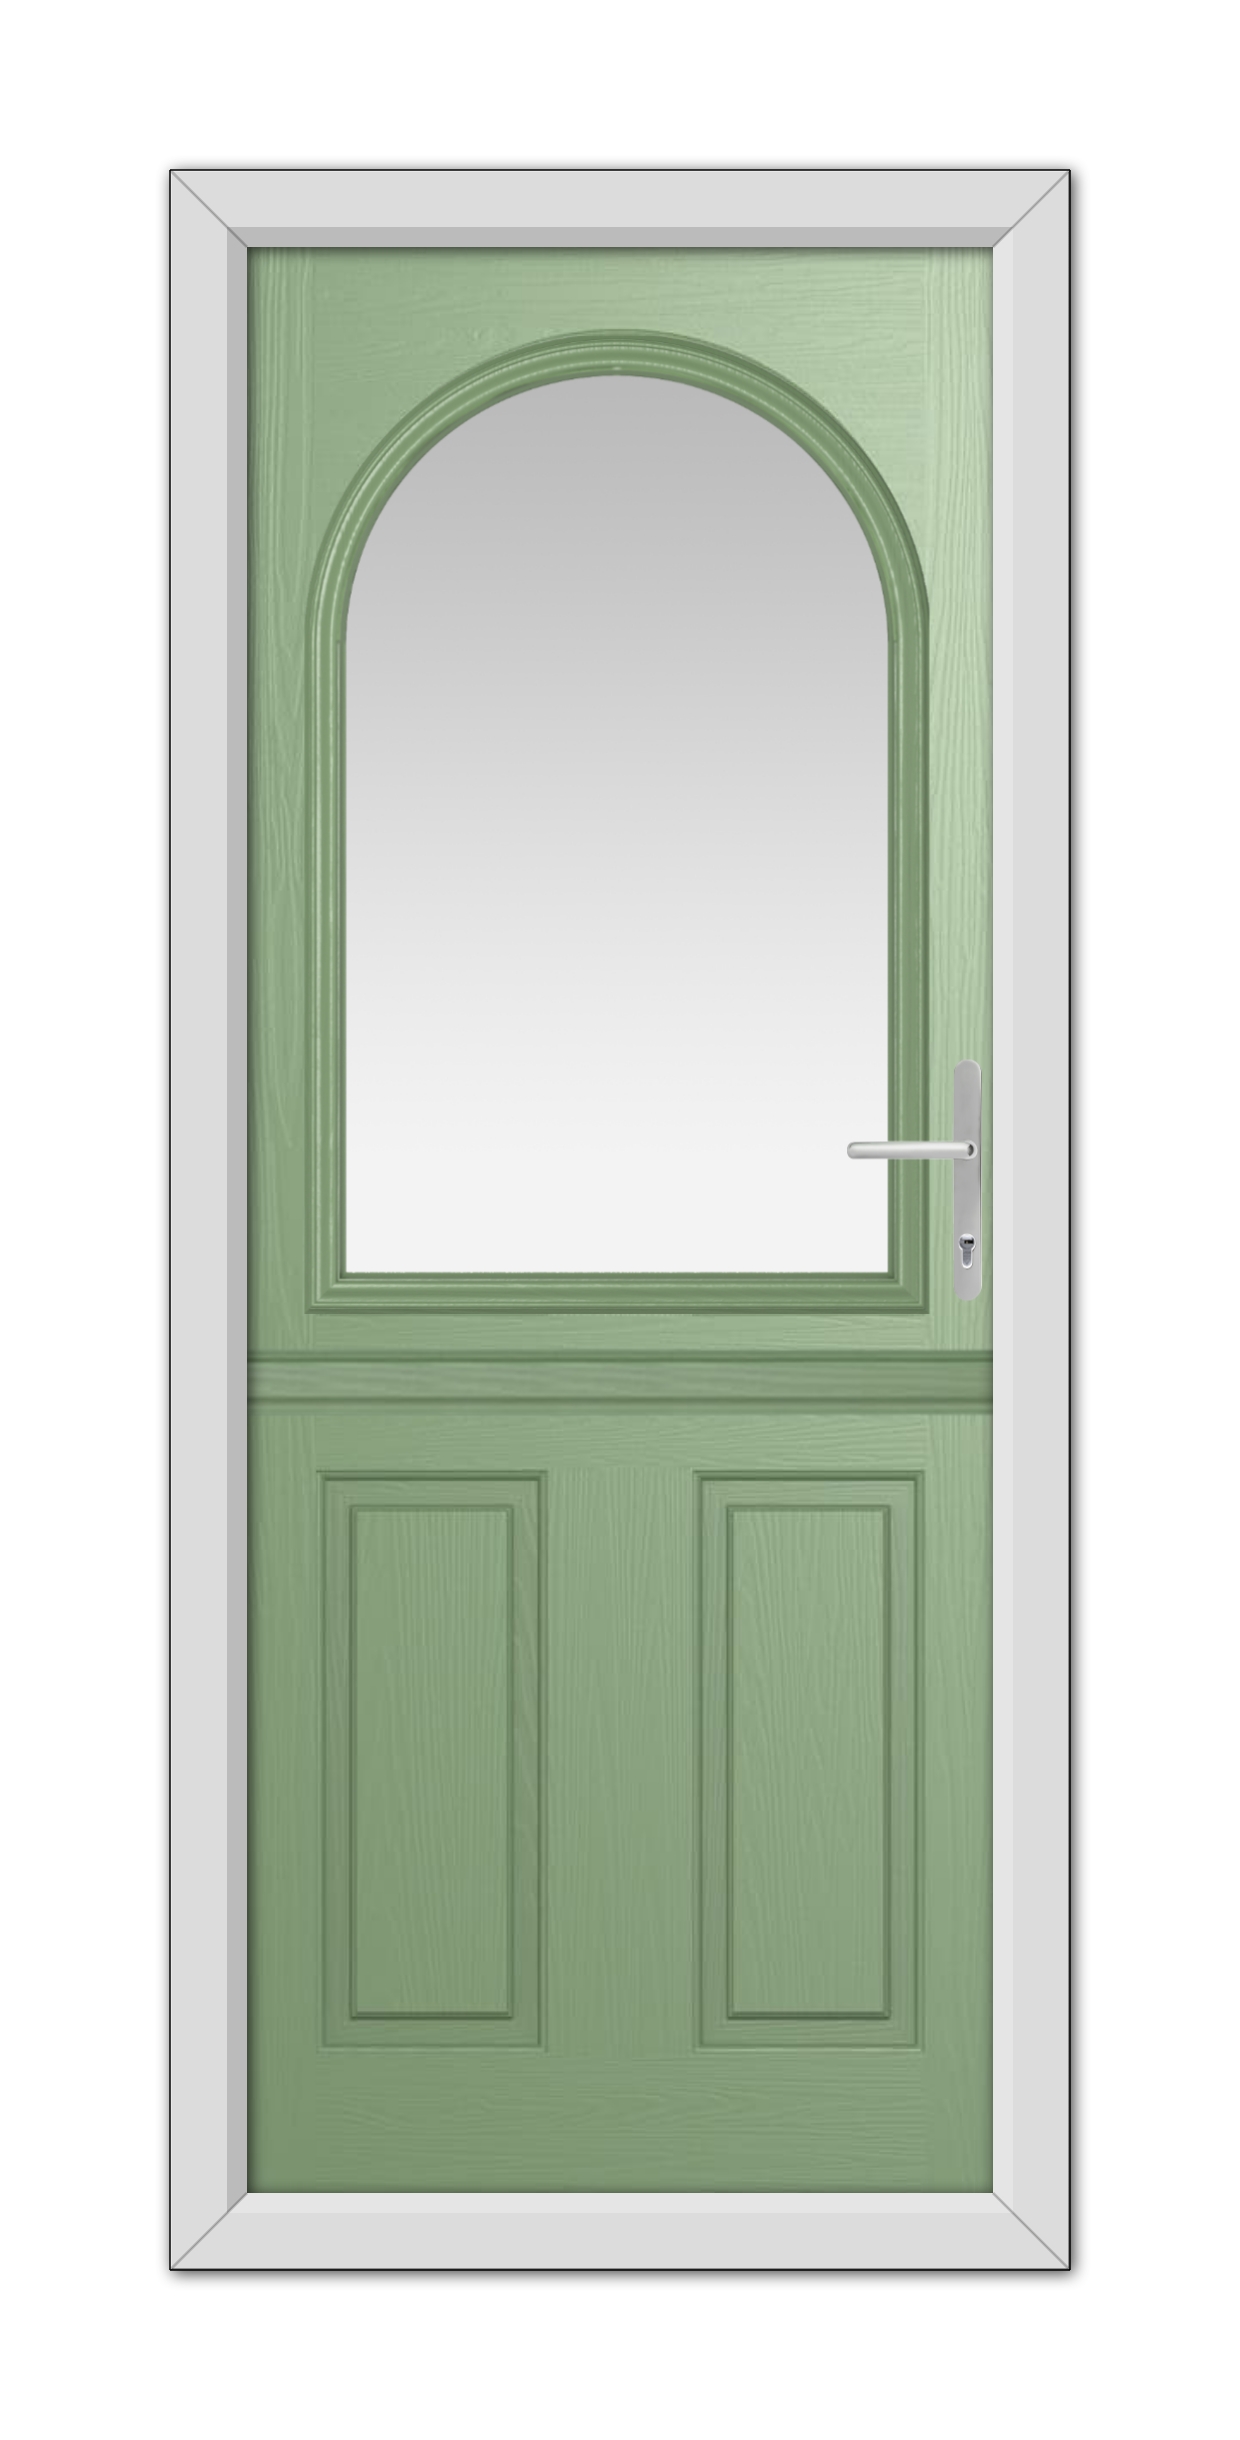 A Chartwell Green Grafton Stable Composite Door 48mm Timber Core with a large arched window and a silver handle, set within a white door frame.